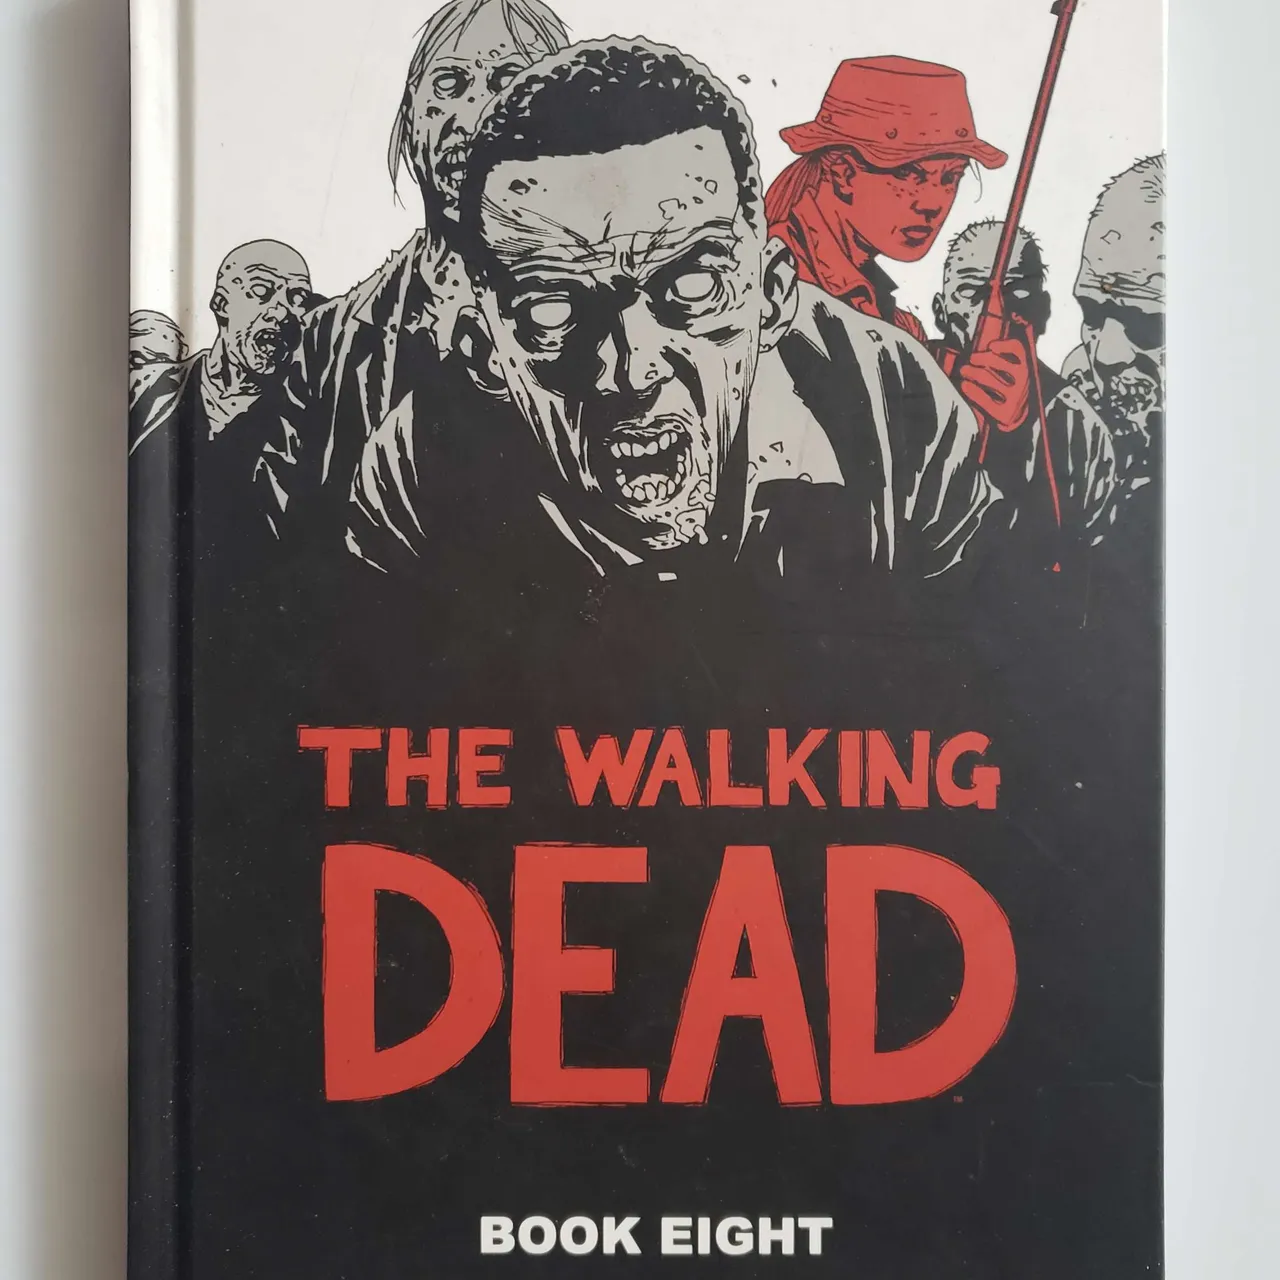 The Walking Dead Graphic Book #8 photo 1